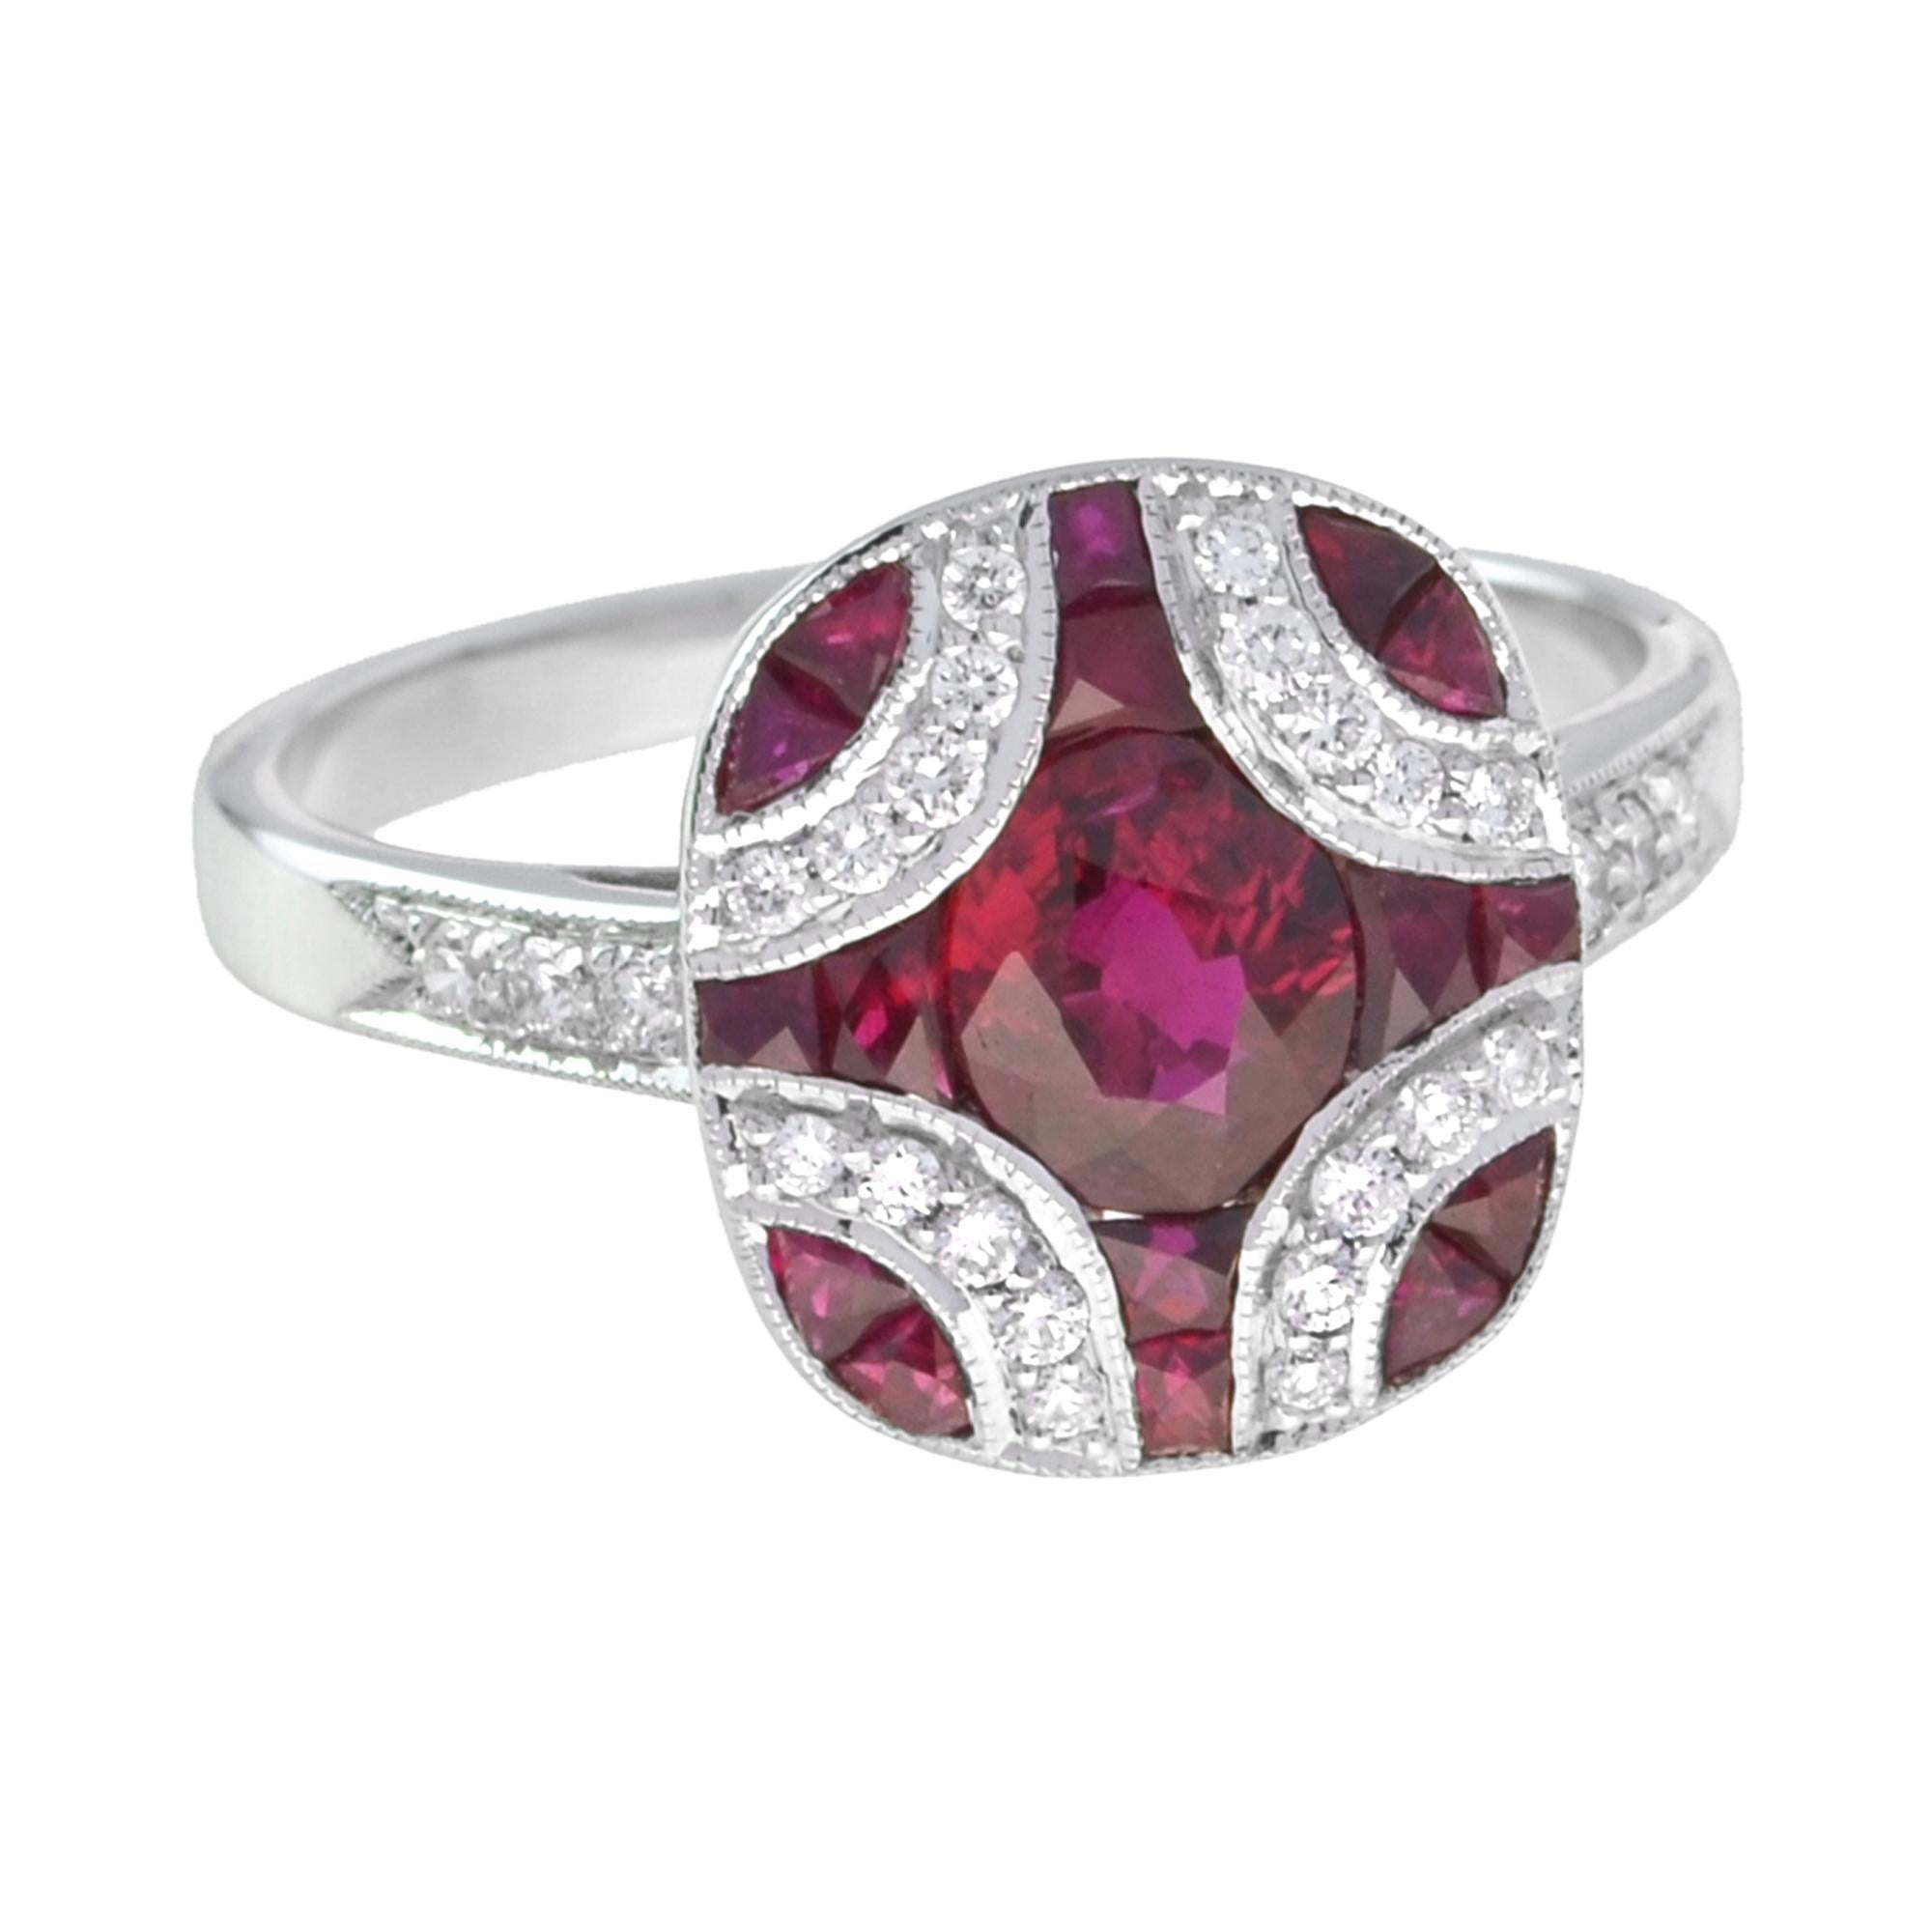 For Sale:  Art Deco Style Oval Ruby with Diamond Cluster Ring in 18K White Gold 6